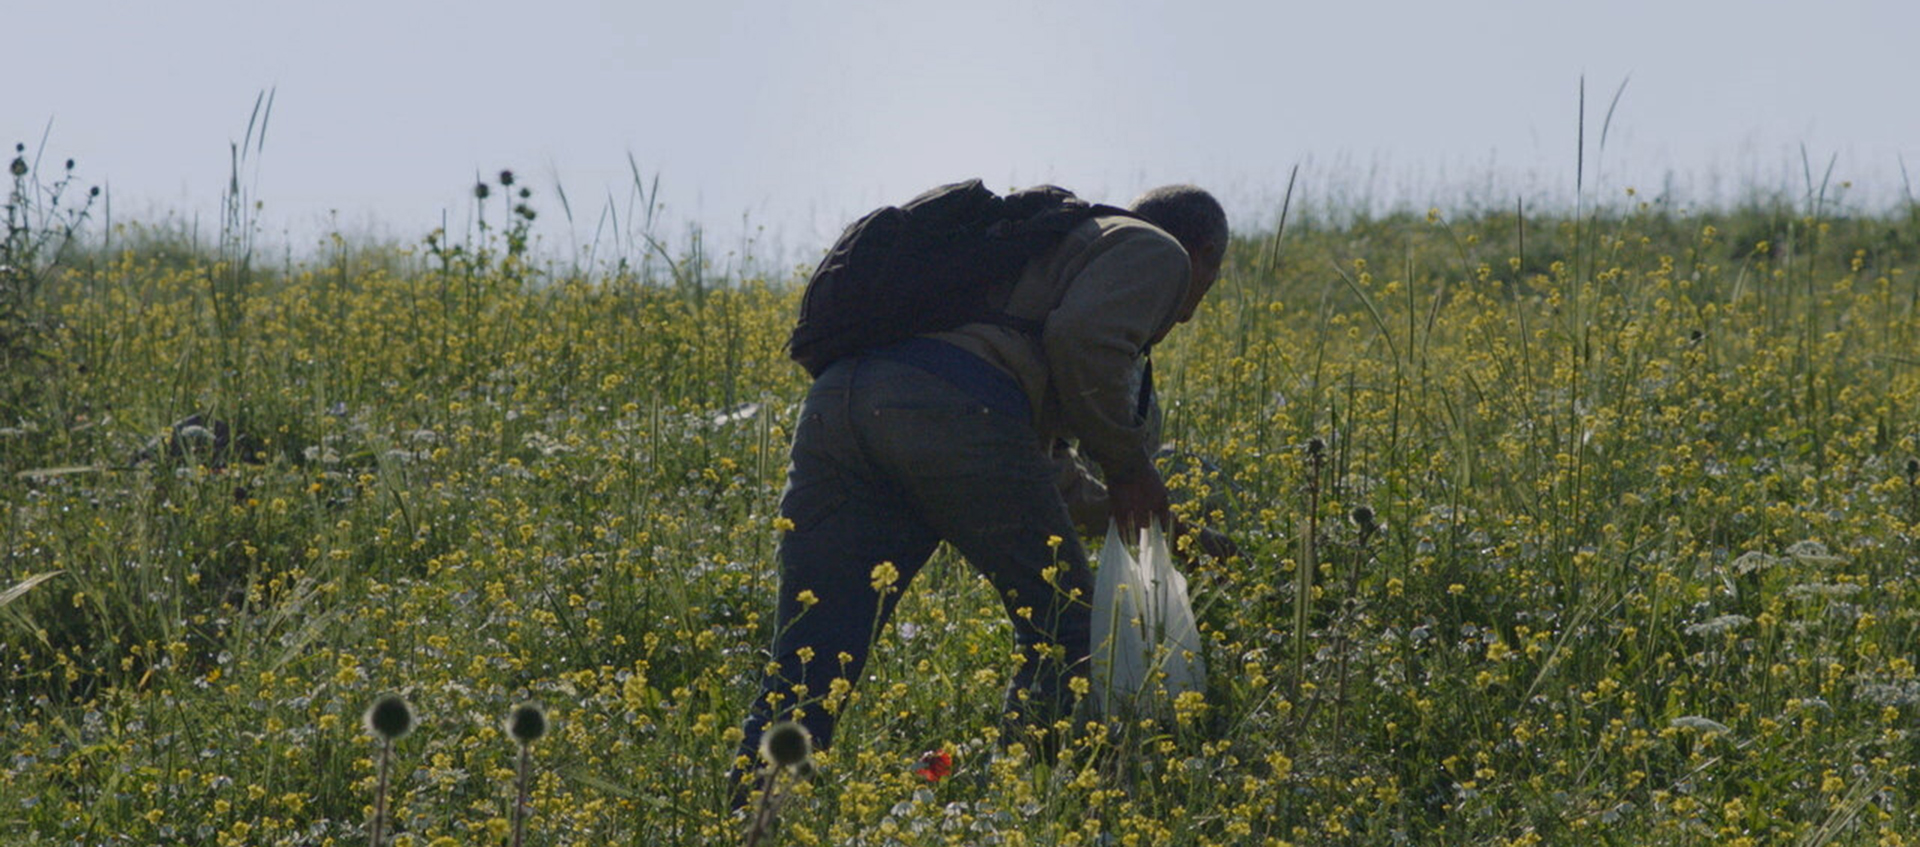 An older Palestinian man viewed from behind leans over in a field of wild grasses and herbs. He wears a backpack and holds a plastic bag.